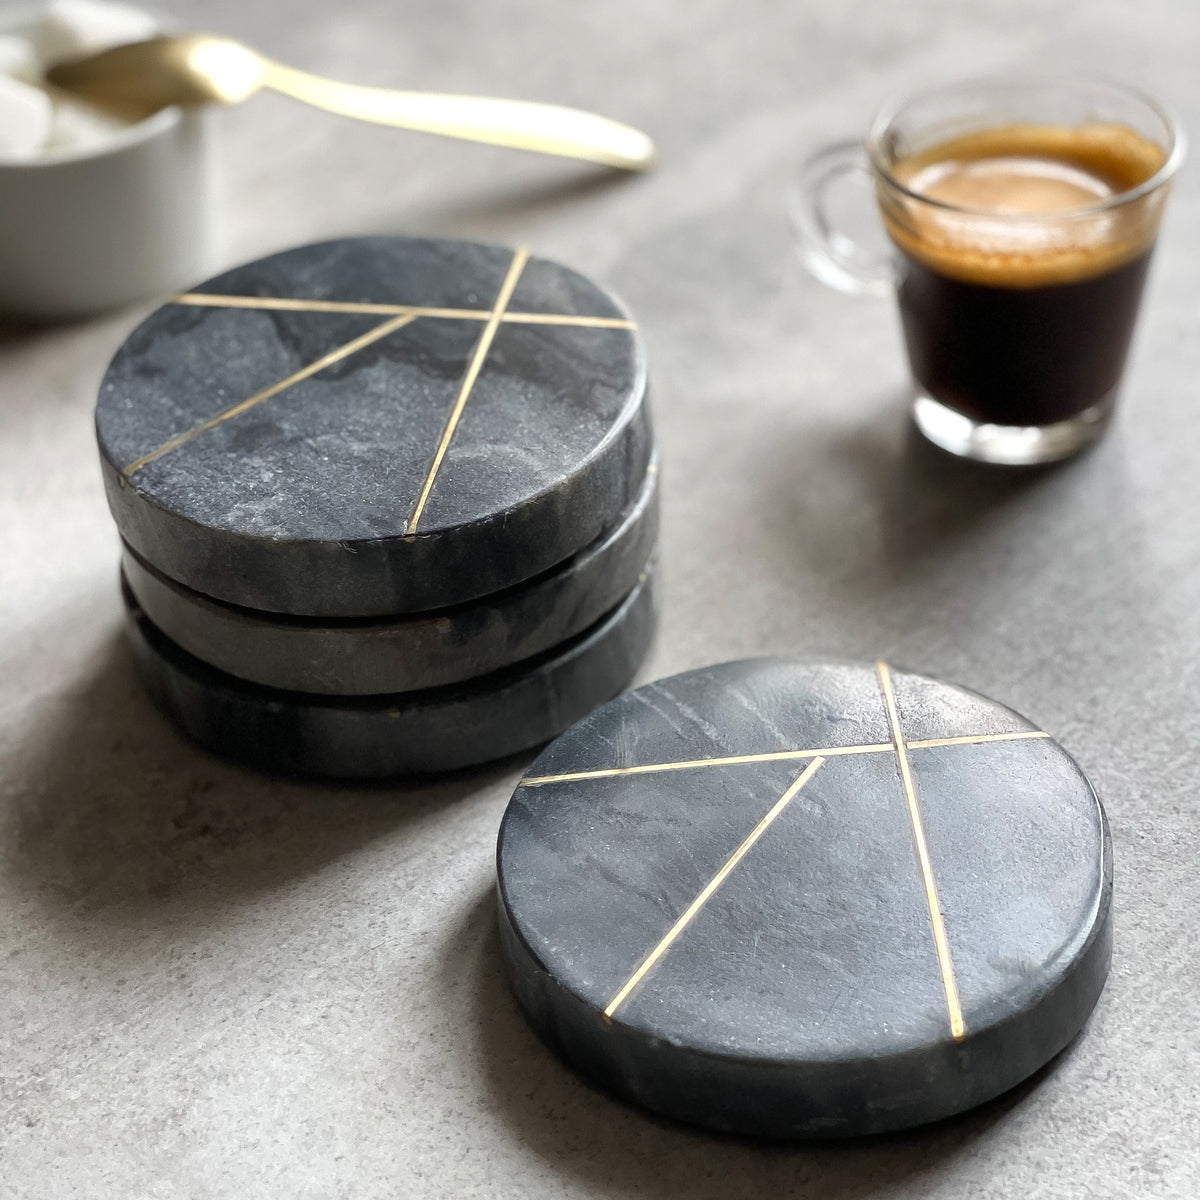 Set of 4 Marble Coasters with Brass Detailing